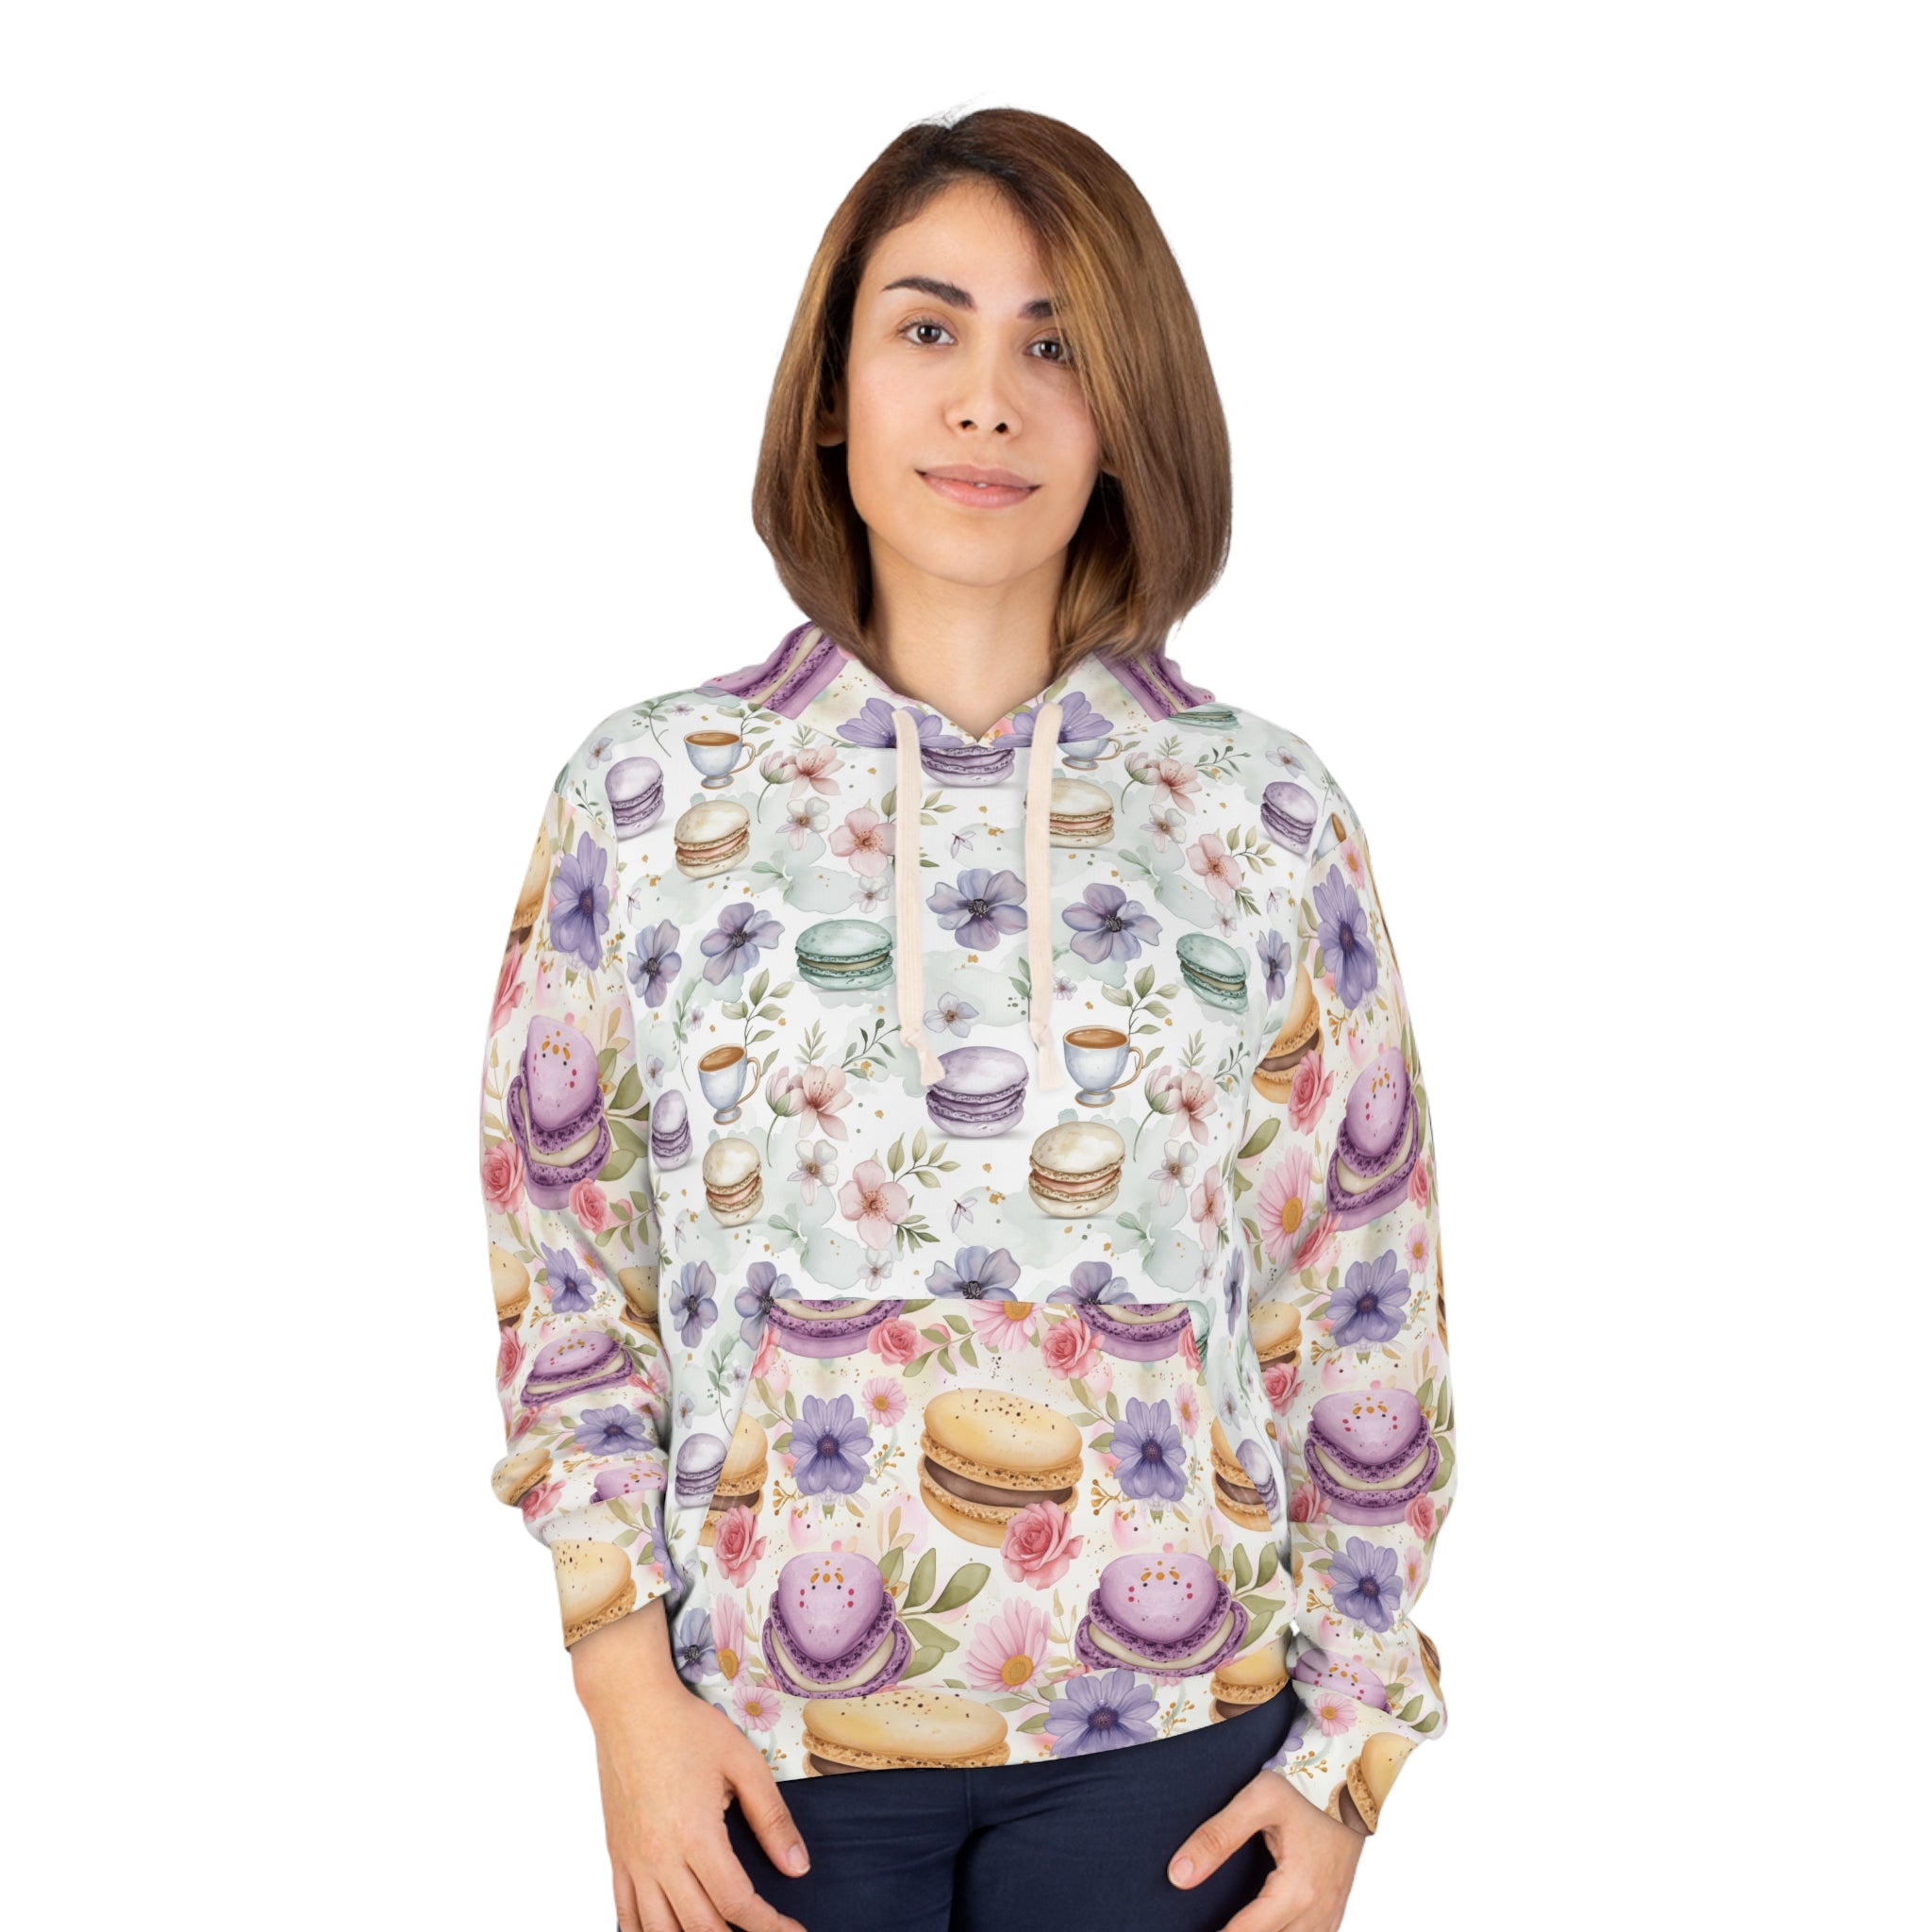 Women's Cute Top I love Macaroons! Stylish Macaroon Pattern Womens Pullover Hoodie (AOP) - Trendy All-Over Print Sweatshirt for Fashion Enthusiasts or Foodies Who Love Pastry